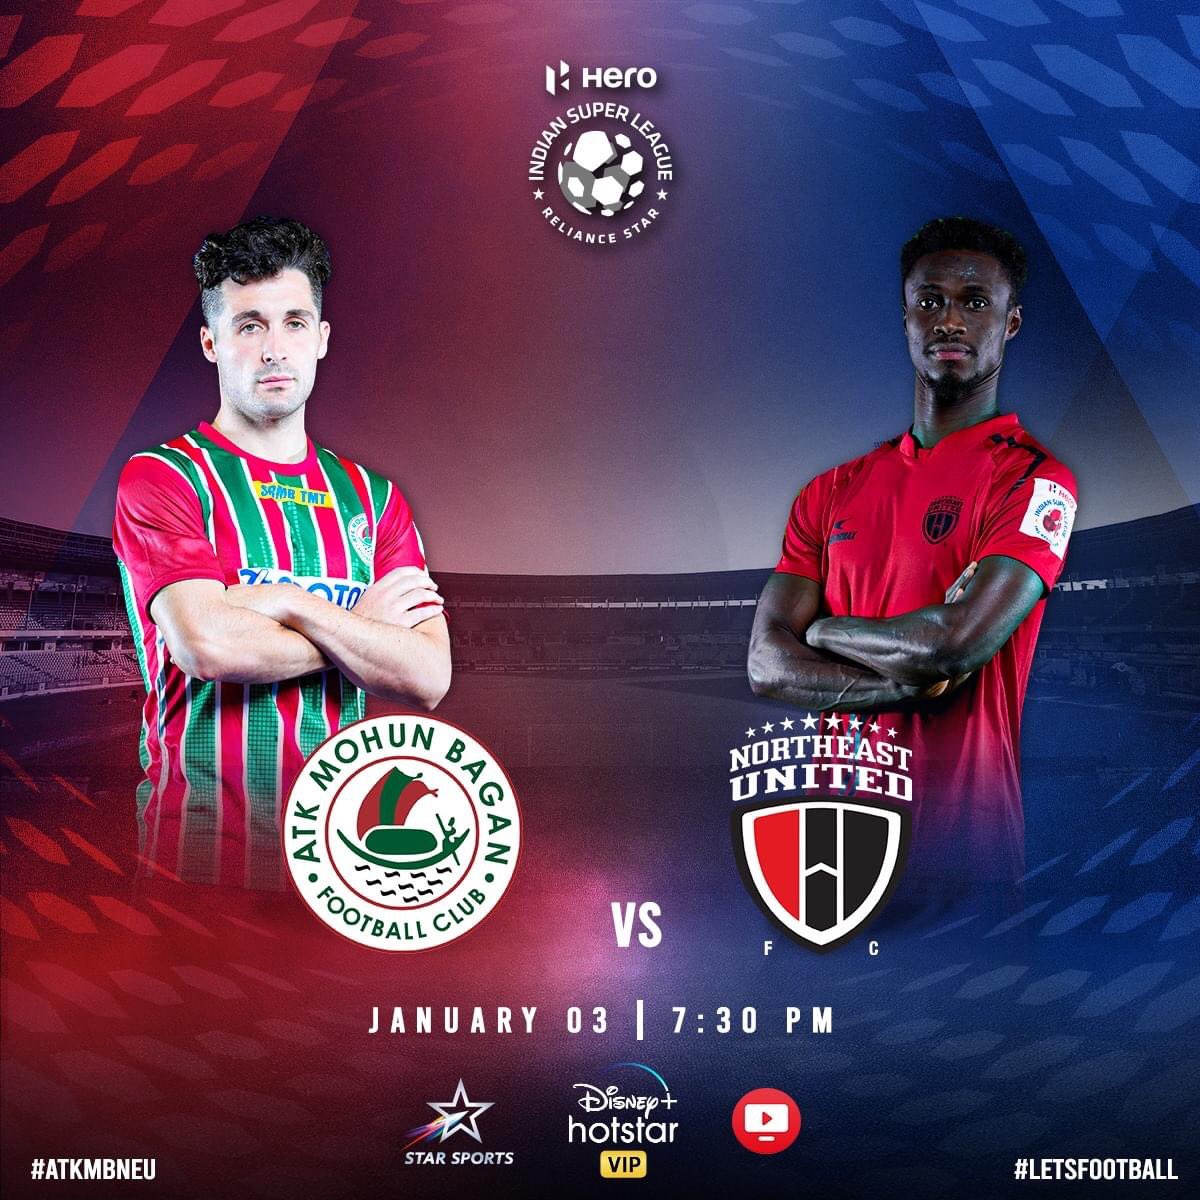 ATK Mohun Bagan will be looking to consolidate its position at the top of the 2020-21 India Super Leauge standings when it takes on NorthEast United FC.
#ISL
#indiansuperleague
#ATKMohunBagan
#PritamKotal
#RoyKrishna
#MichaelRegin
#NorthEastUnitedFC
#GoAWin
#IndiaFootballTeam